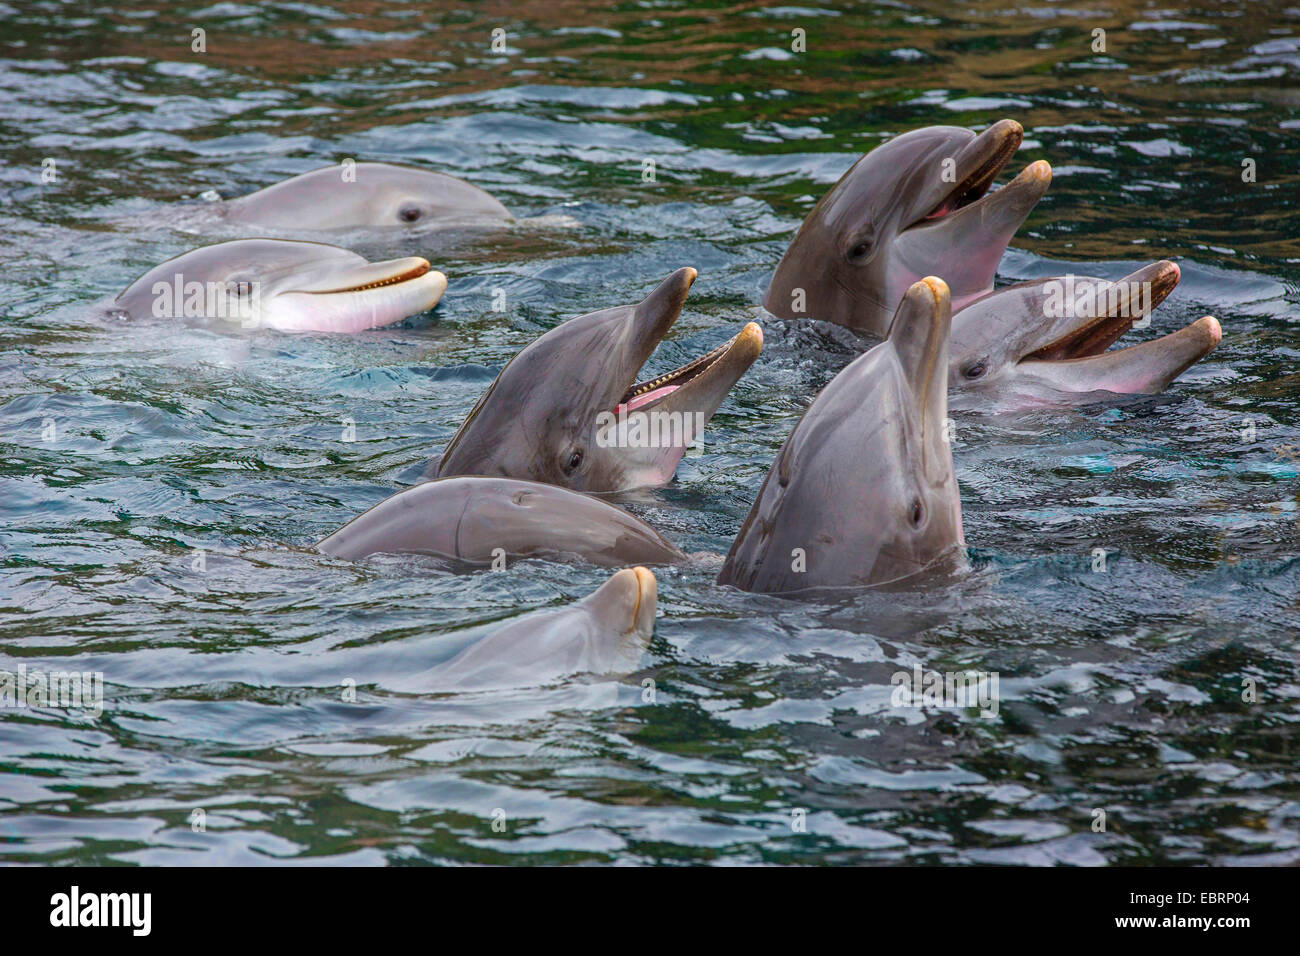 Bottlenosed dolphin, Common bottle-nosed dolphin (Tursiops truncatus), eight dolphins looking out of the water Stock Photo